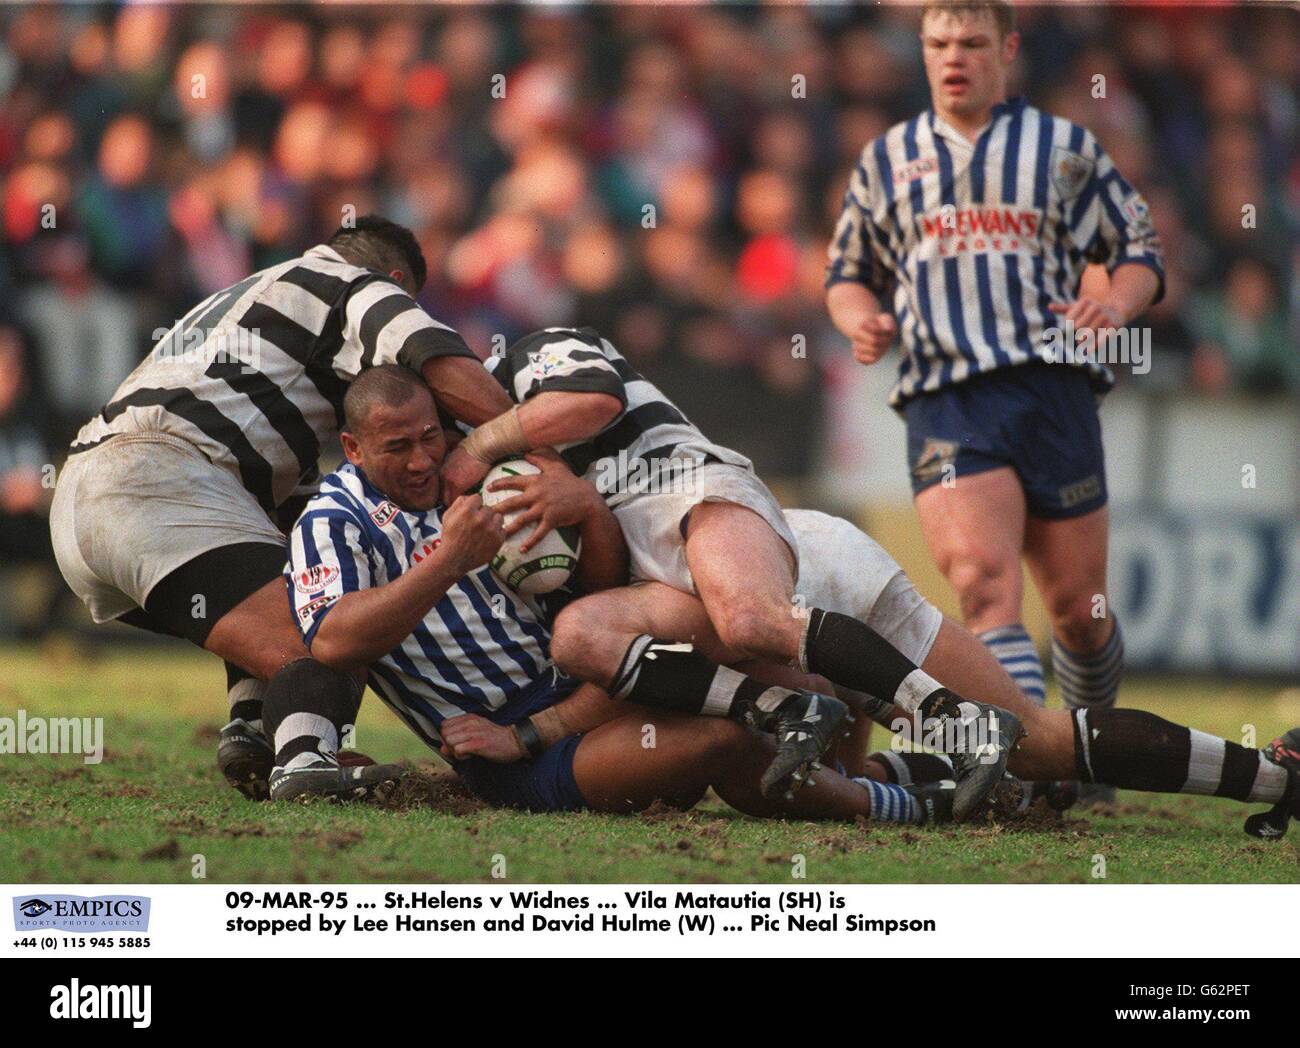 09-MAR-96 ... St Helens v Widnes ... Vila Matautia (SH) is stopped by Lee Hansen and David Hulme (W) Stock Photo